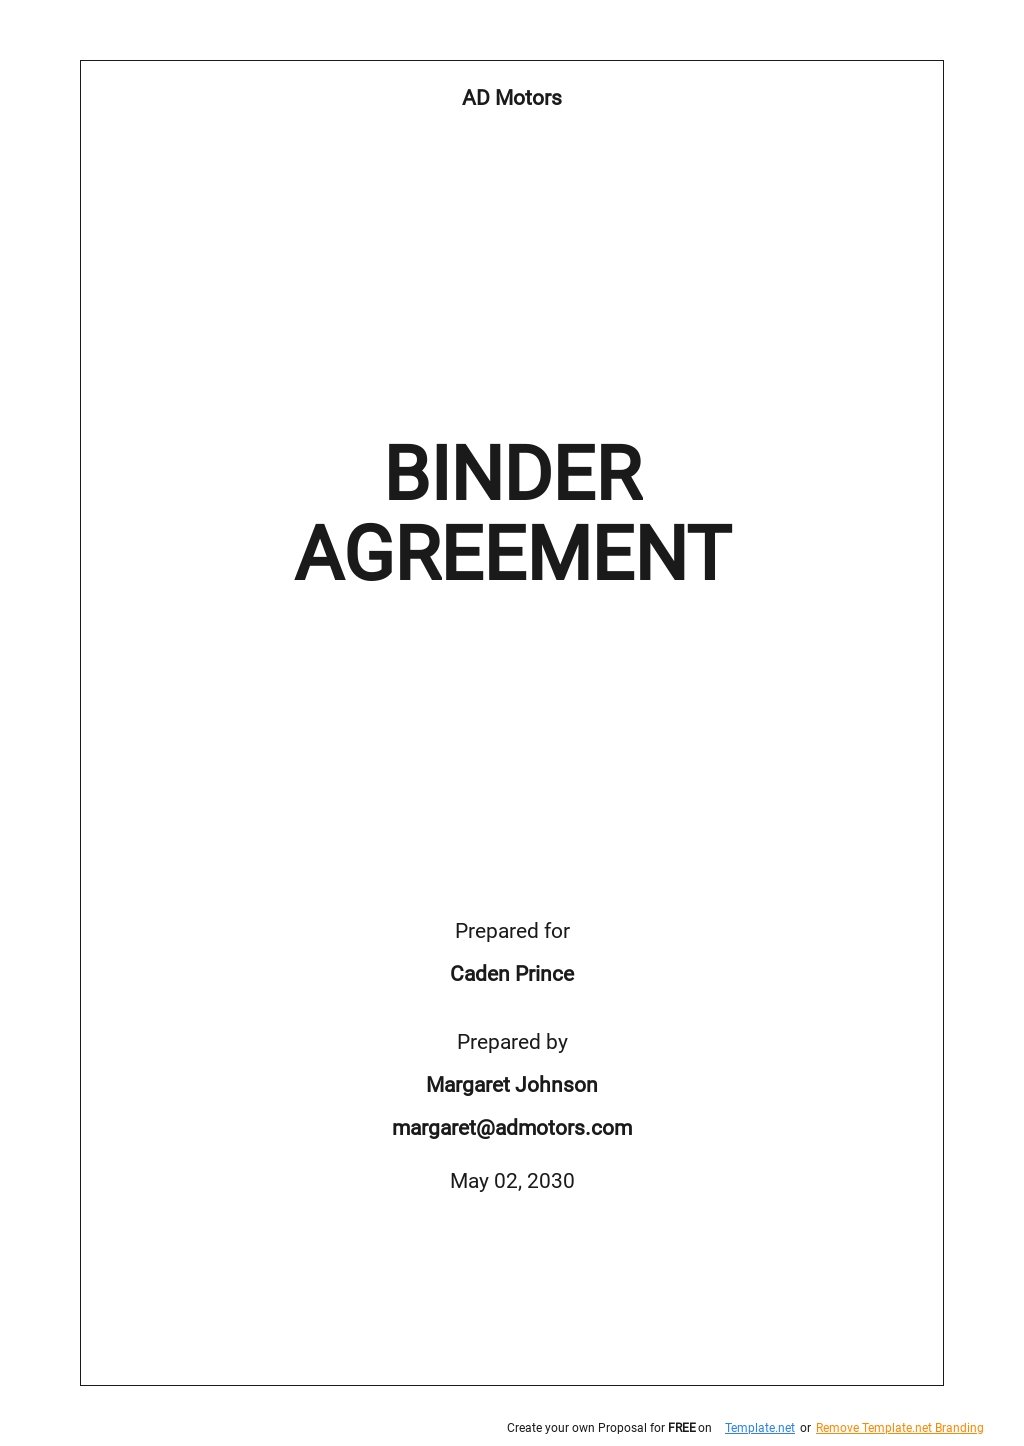 Binder Agreement Template Google Docs, Word, Apple Pages